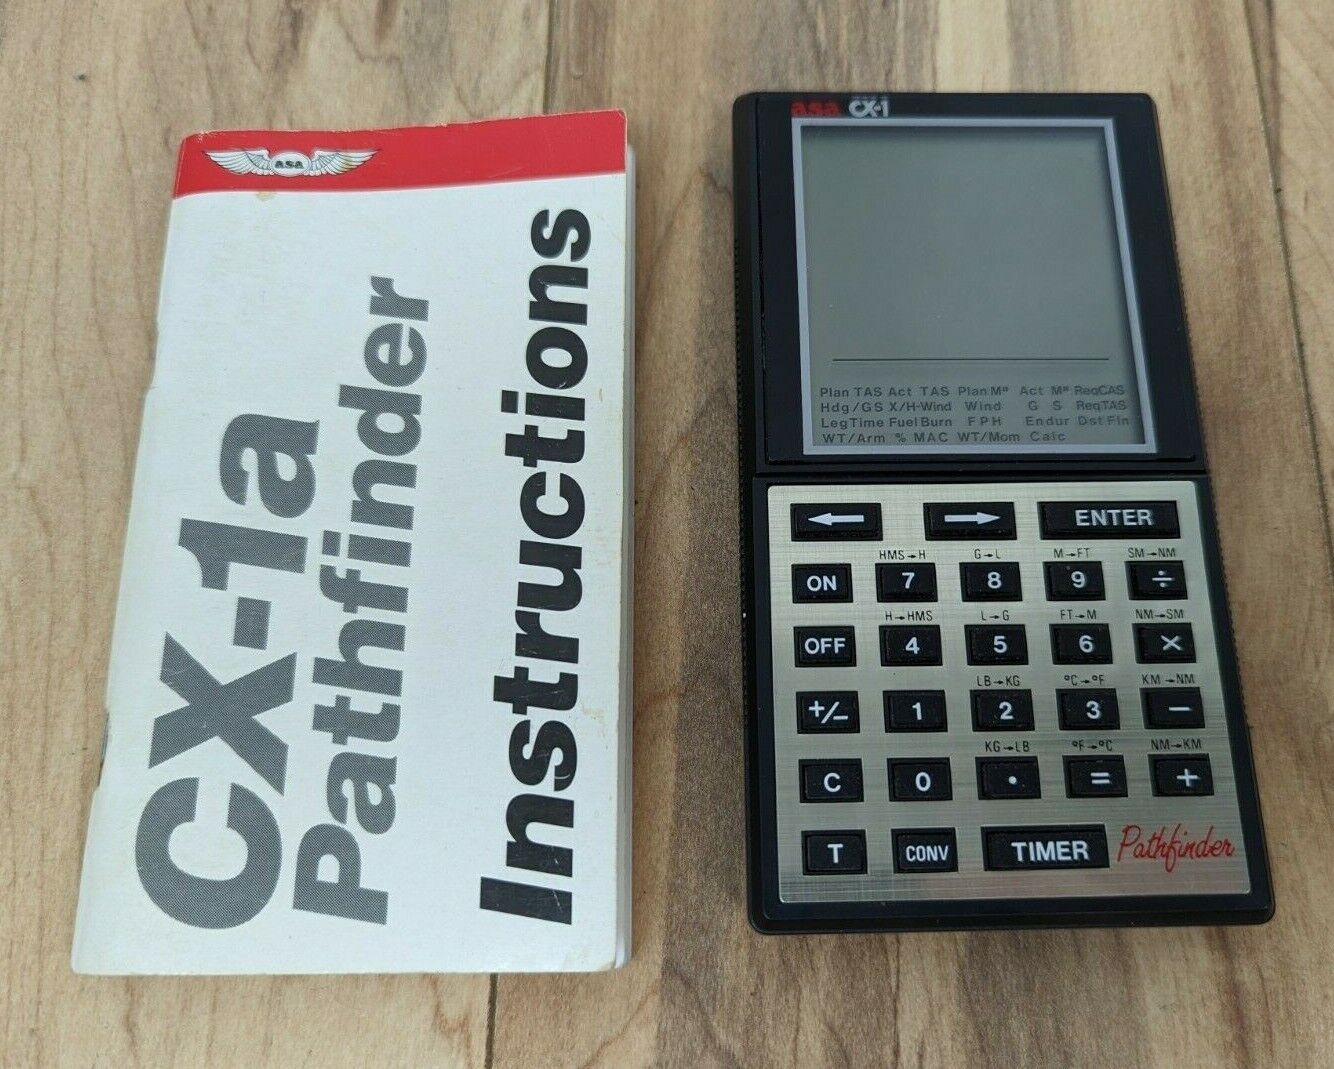 ASA Air CX-1A Pathfinder Flight Computer Instruction w/ Manual - Tested, Works